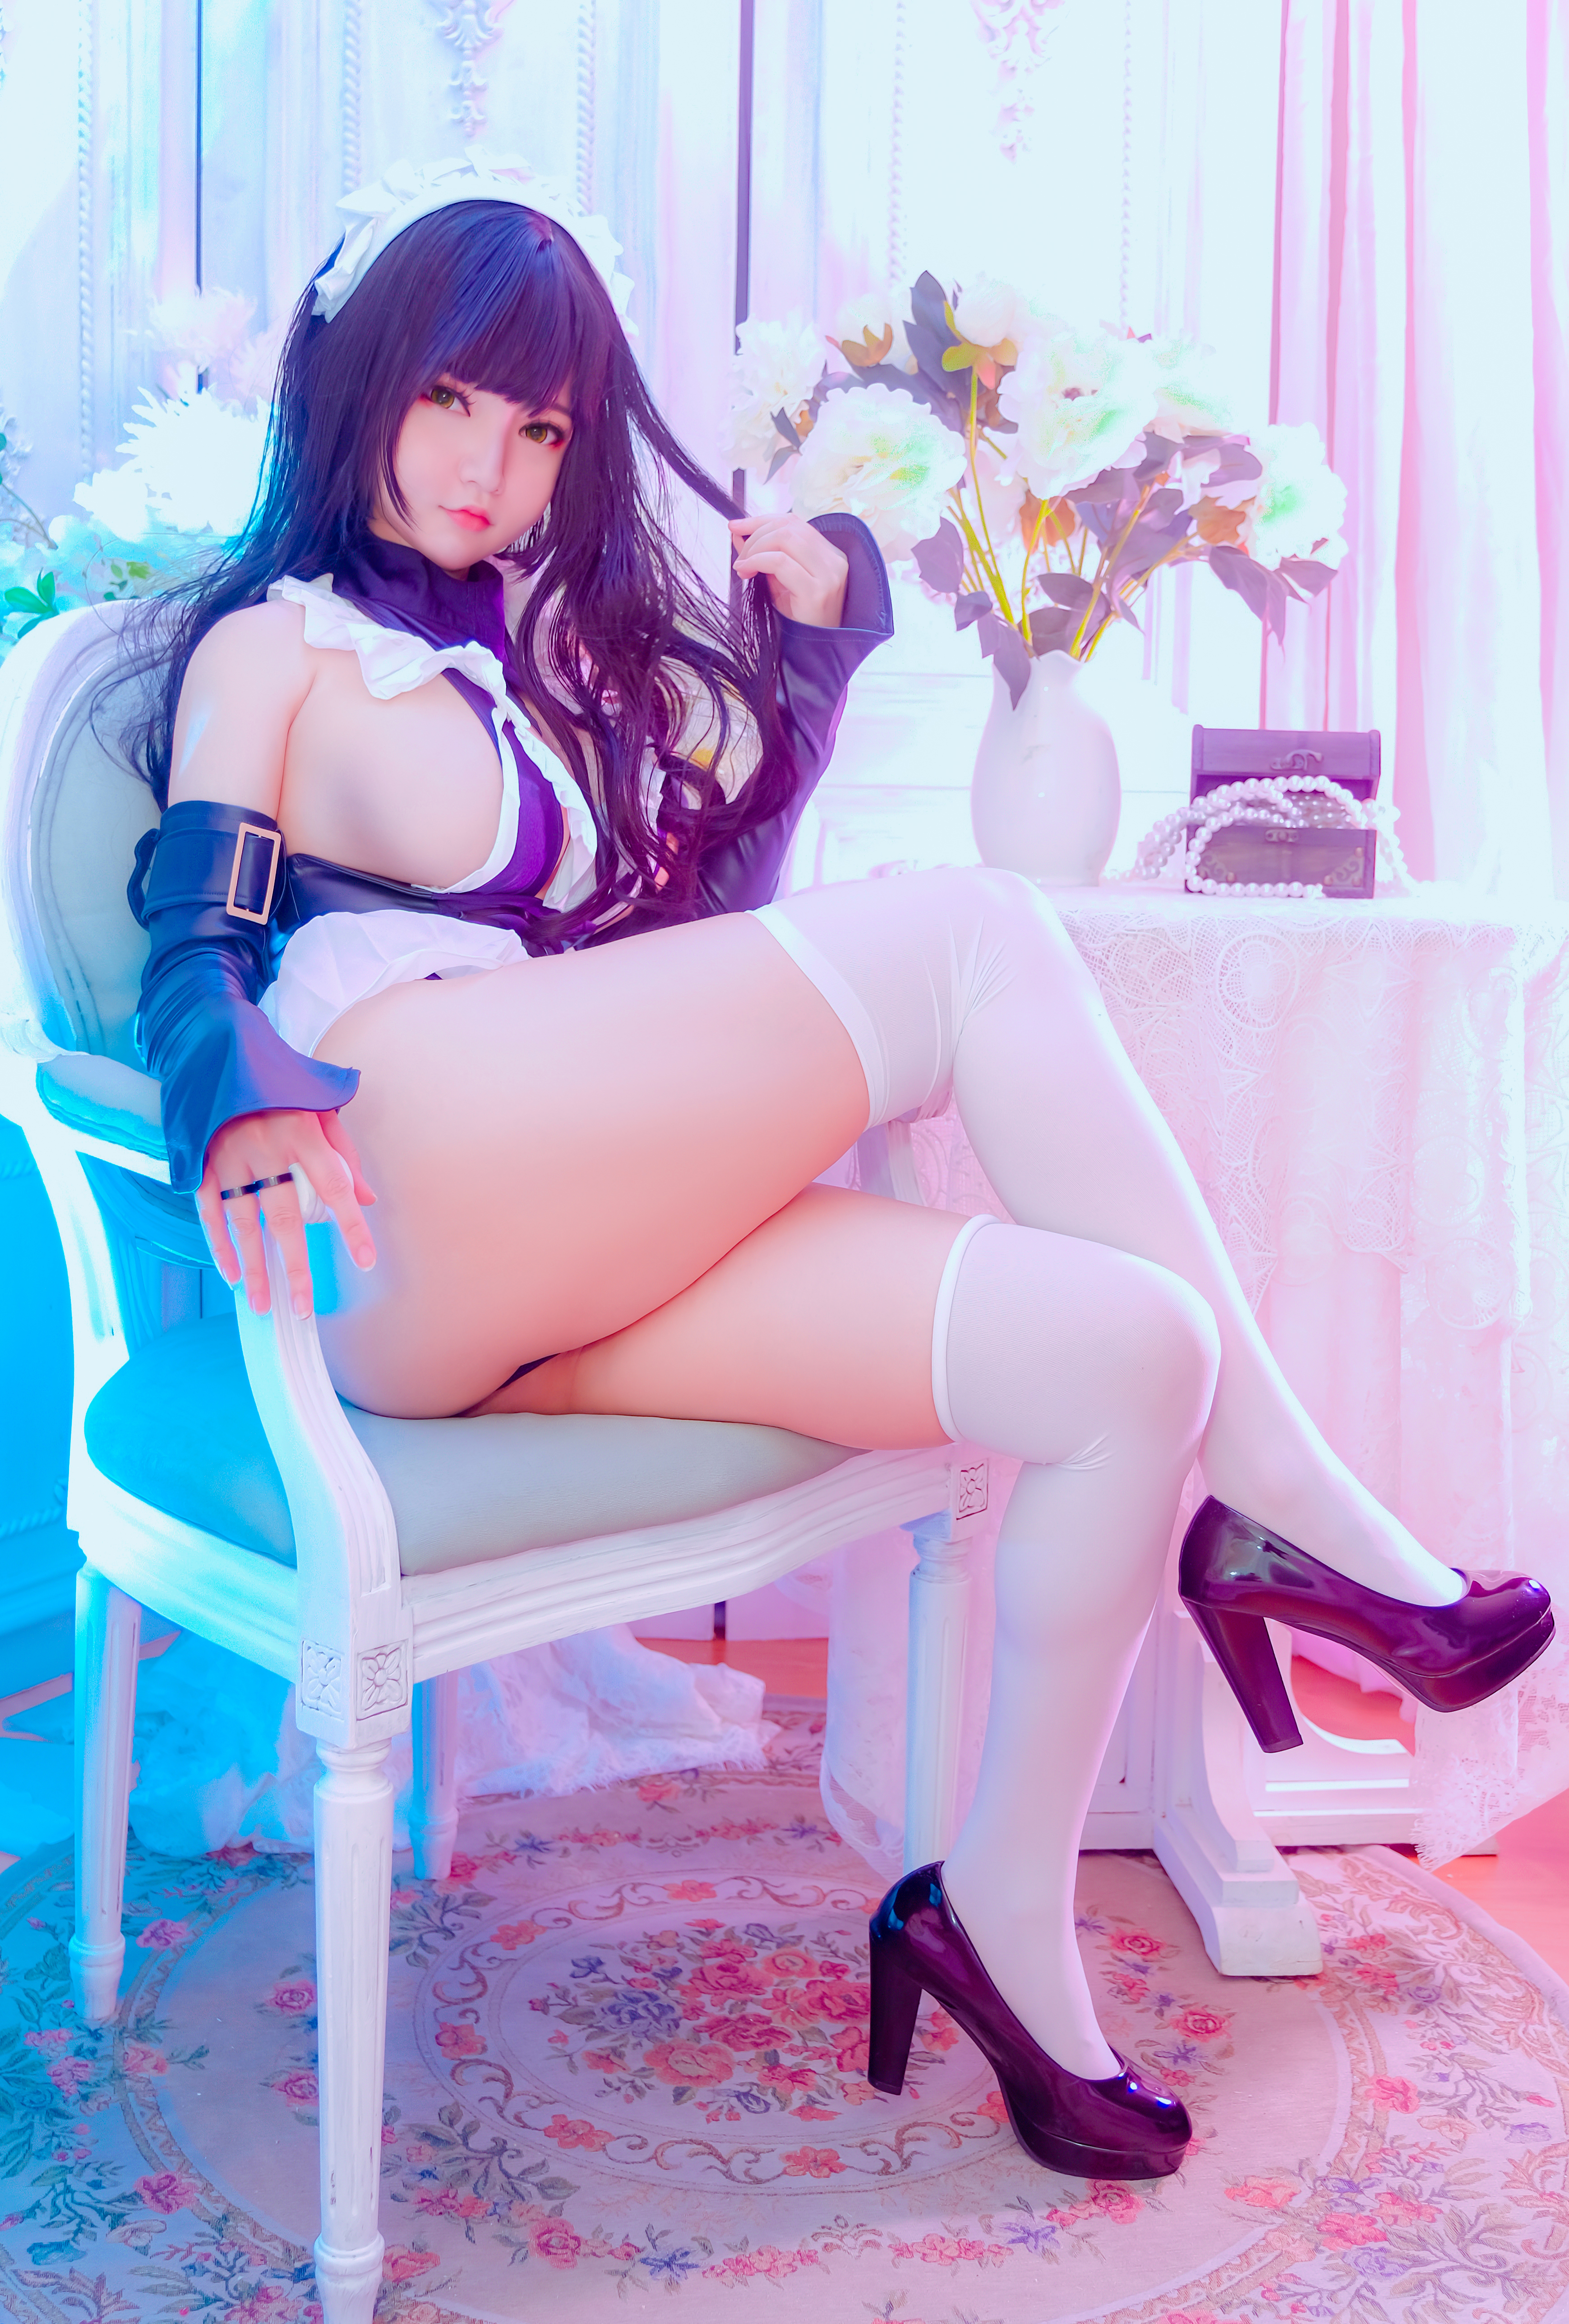 People 3478x5153 Potato Godzilla cosplay model leather tights heels boobs costumes chair women maid outfit White leggings stockings high heels legs crossed white stockings